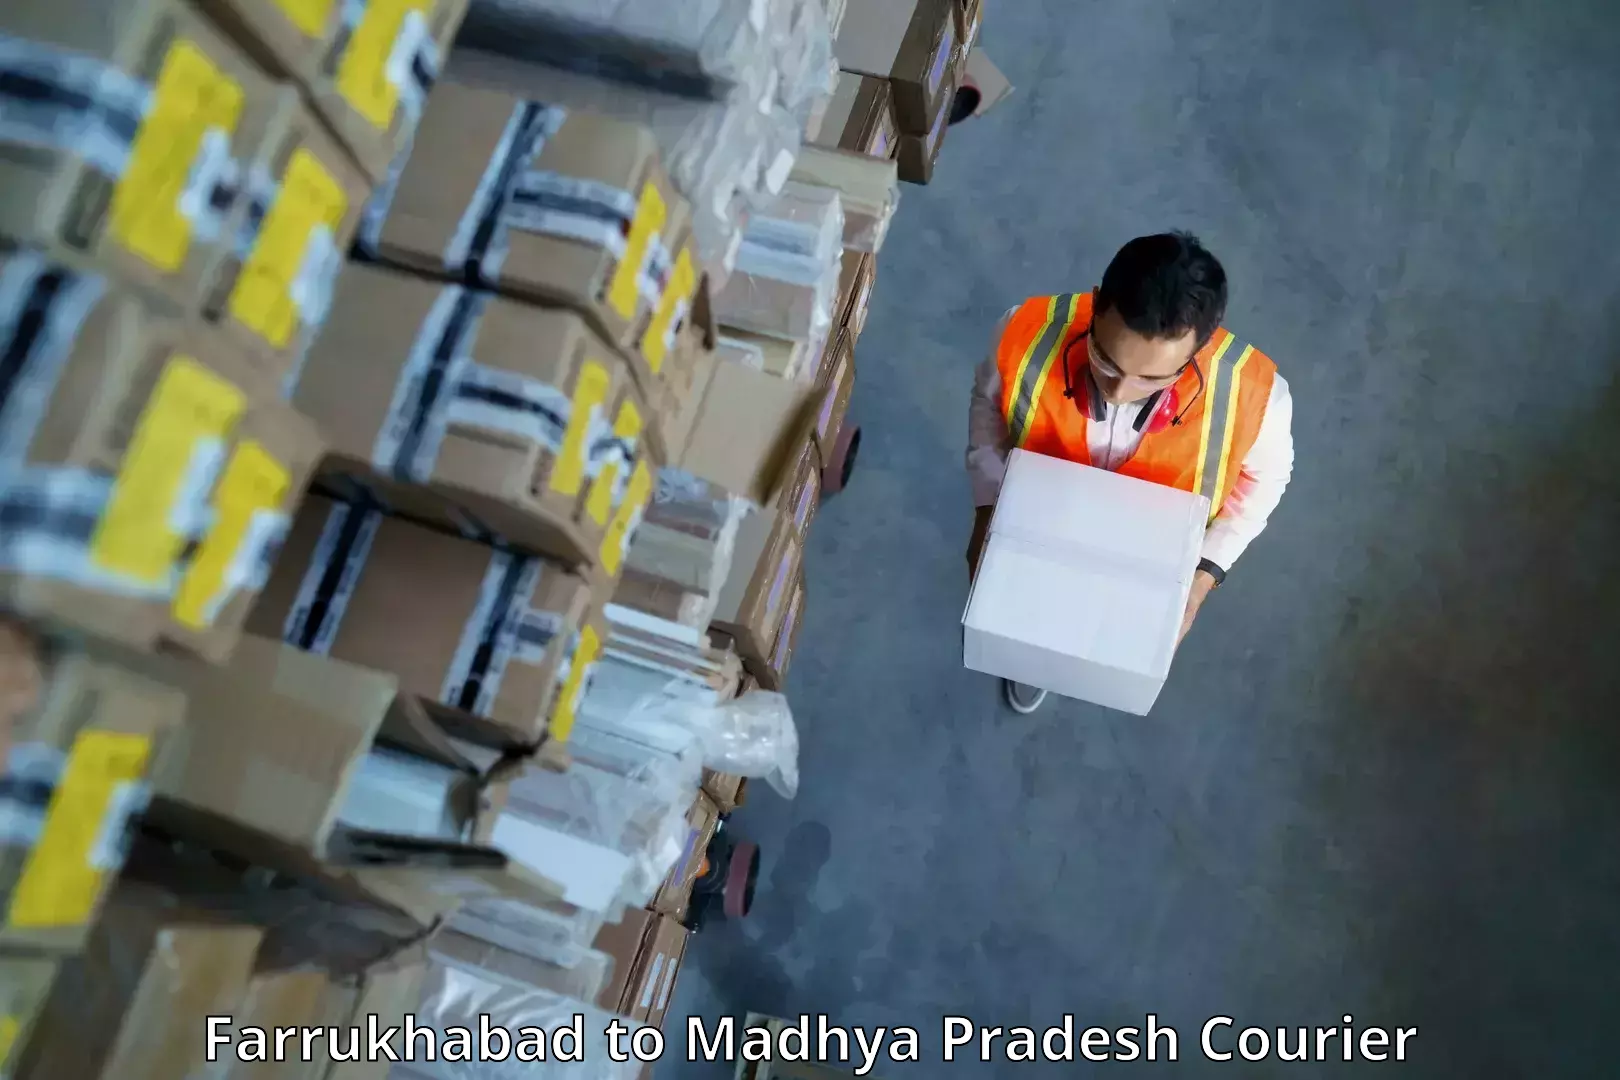 High-speed parcel service Farrukhabad to Shahgarh